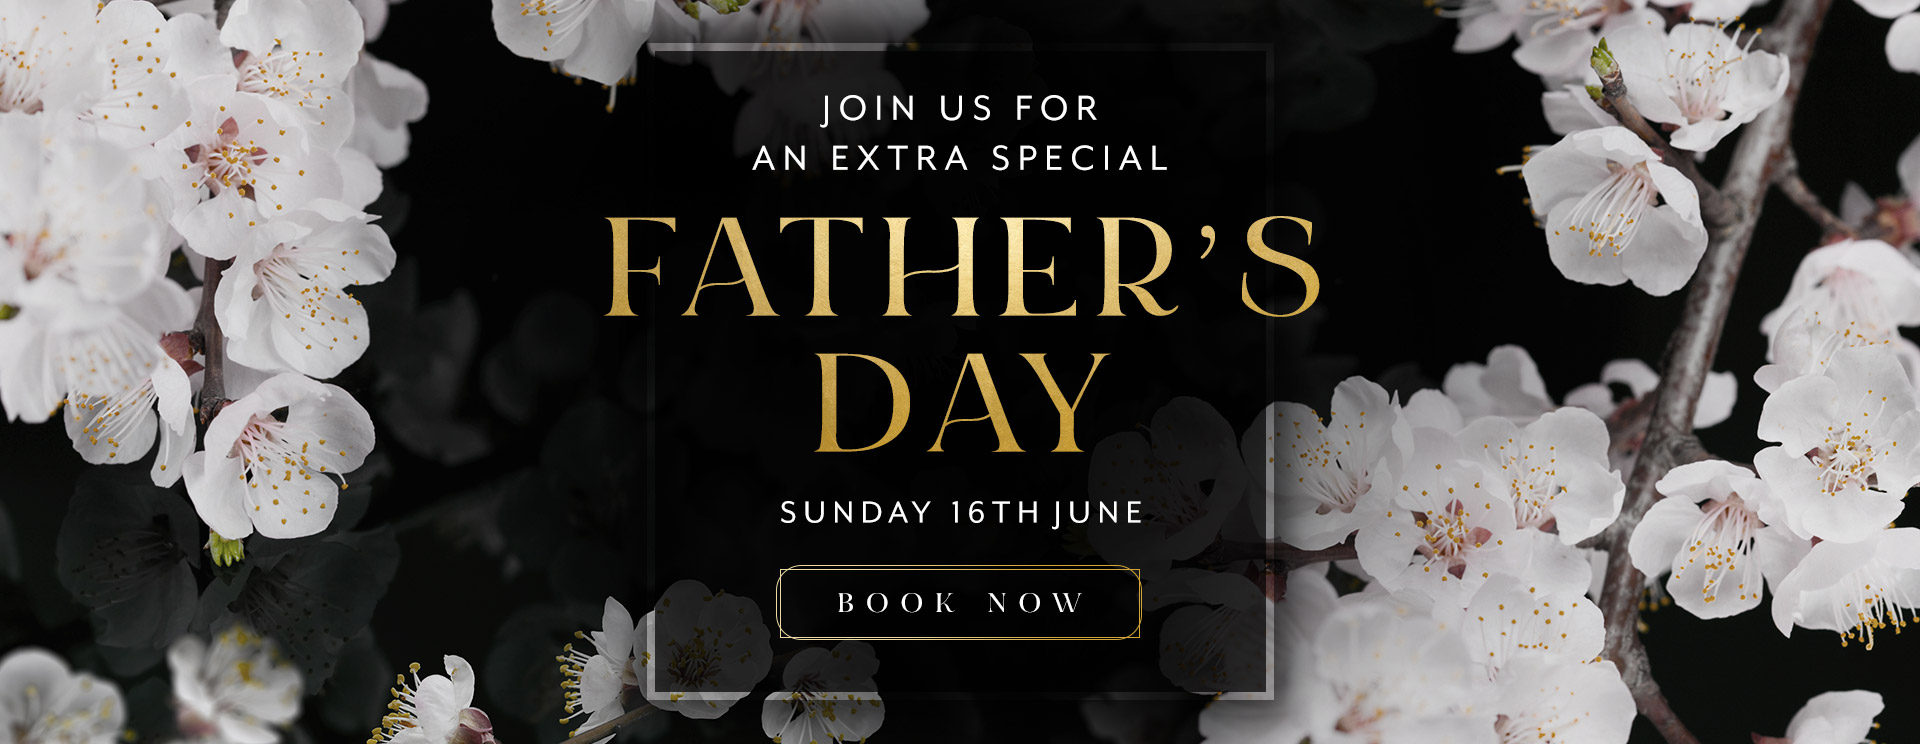 Father’s Day menu Solihull